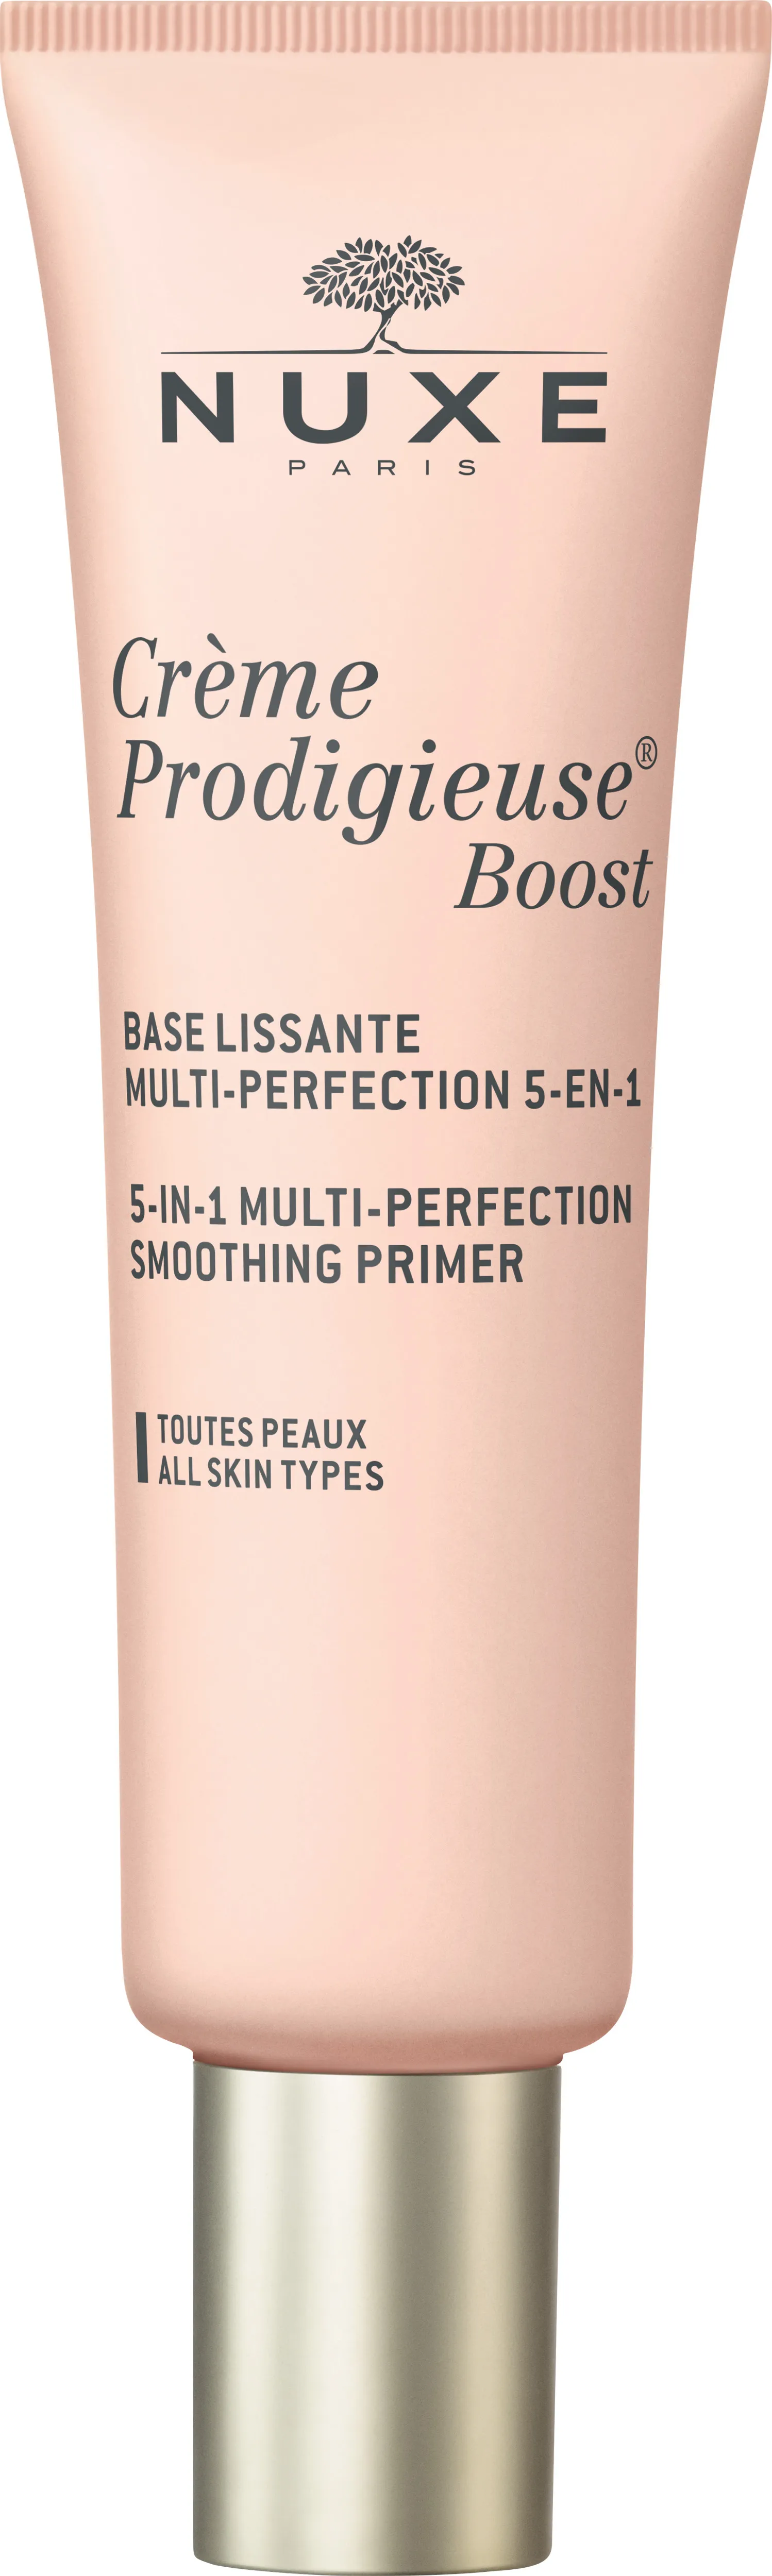 Nuxe Creme Prodigieuse Boost 5 in 1 Multi Perfection Smoothing Primer